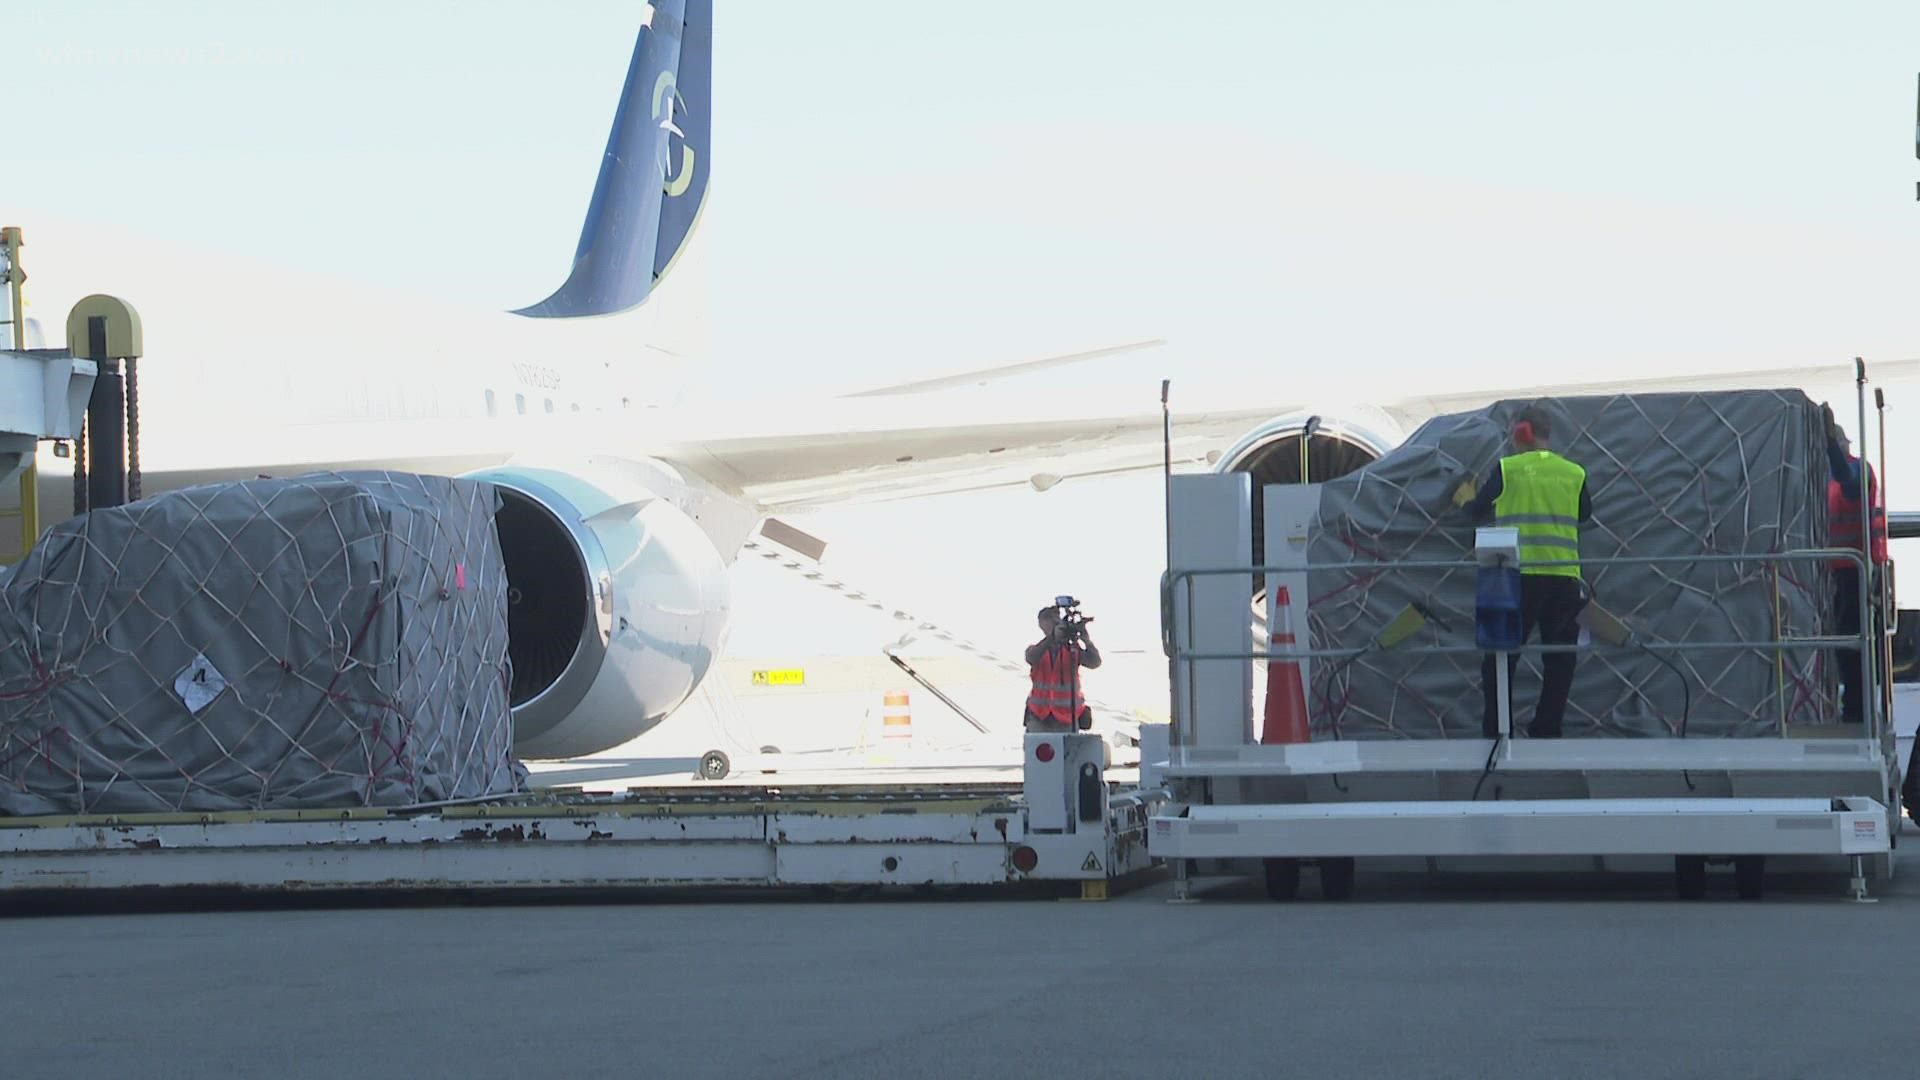 They loaded up a plane in Greensboro, bound for Poland. A truck will take the supplies to Ukraine.